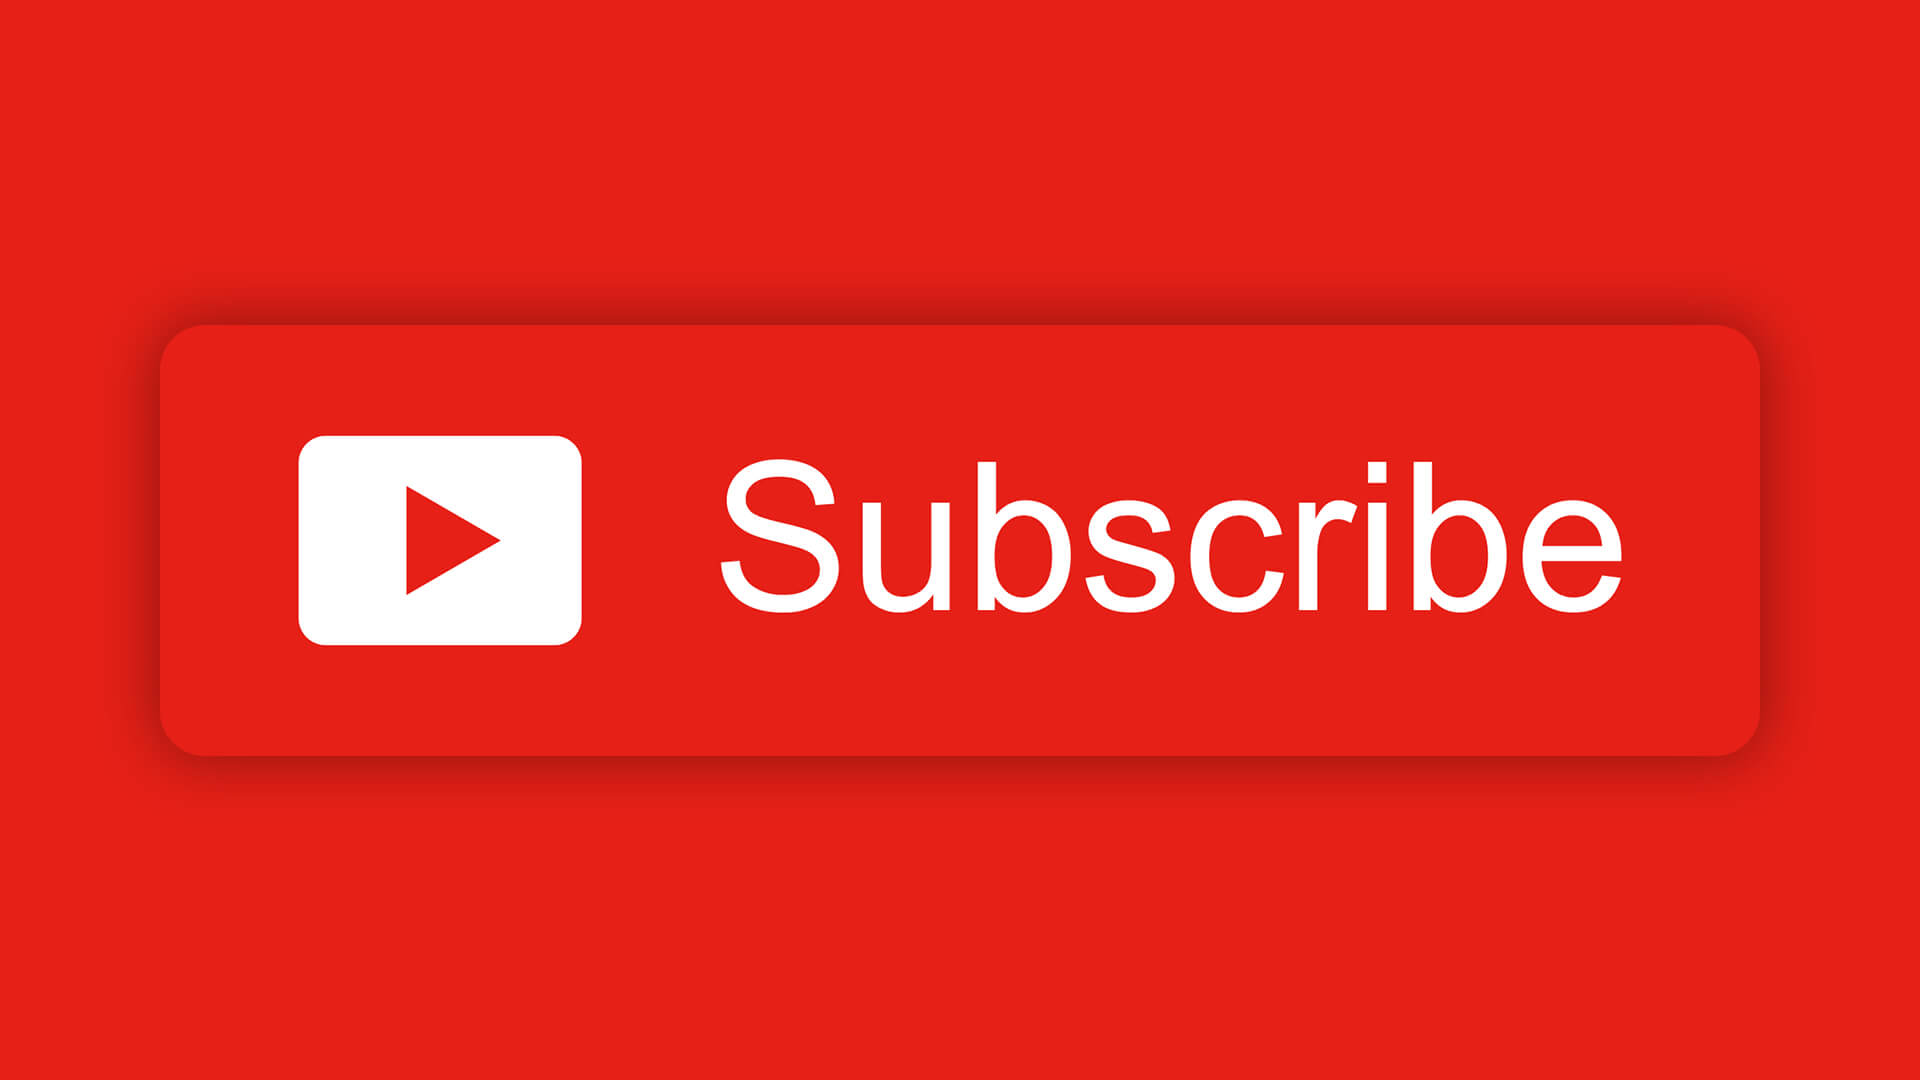 Free YouTube Subscribe Button Download Design Inspiration By AlfredoCreates 4 1